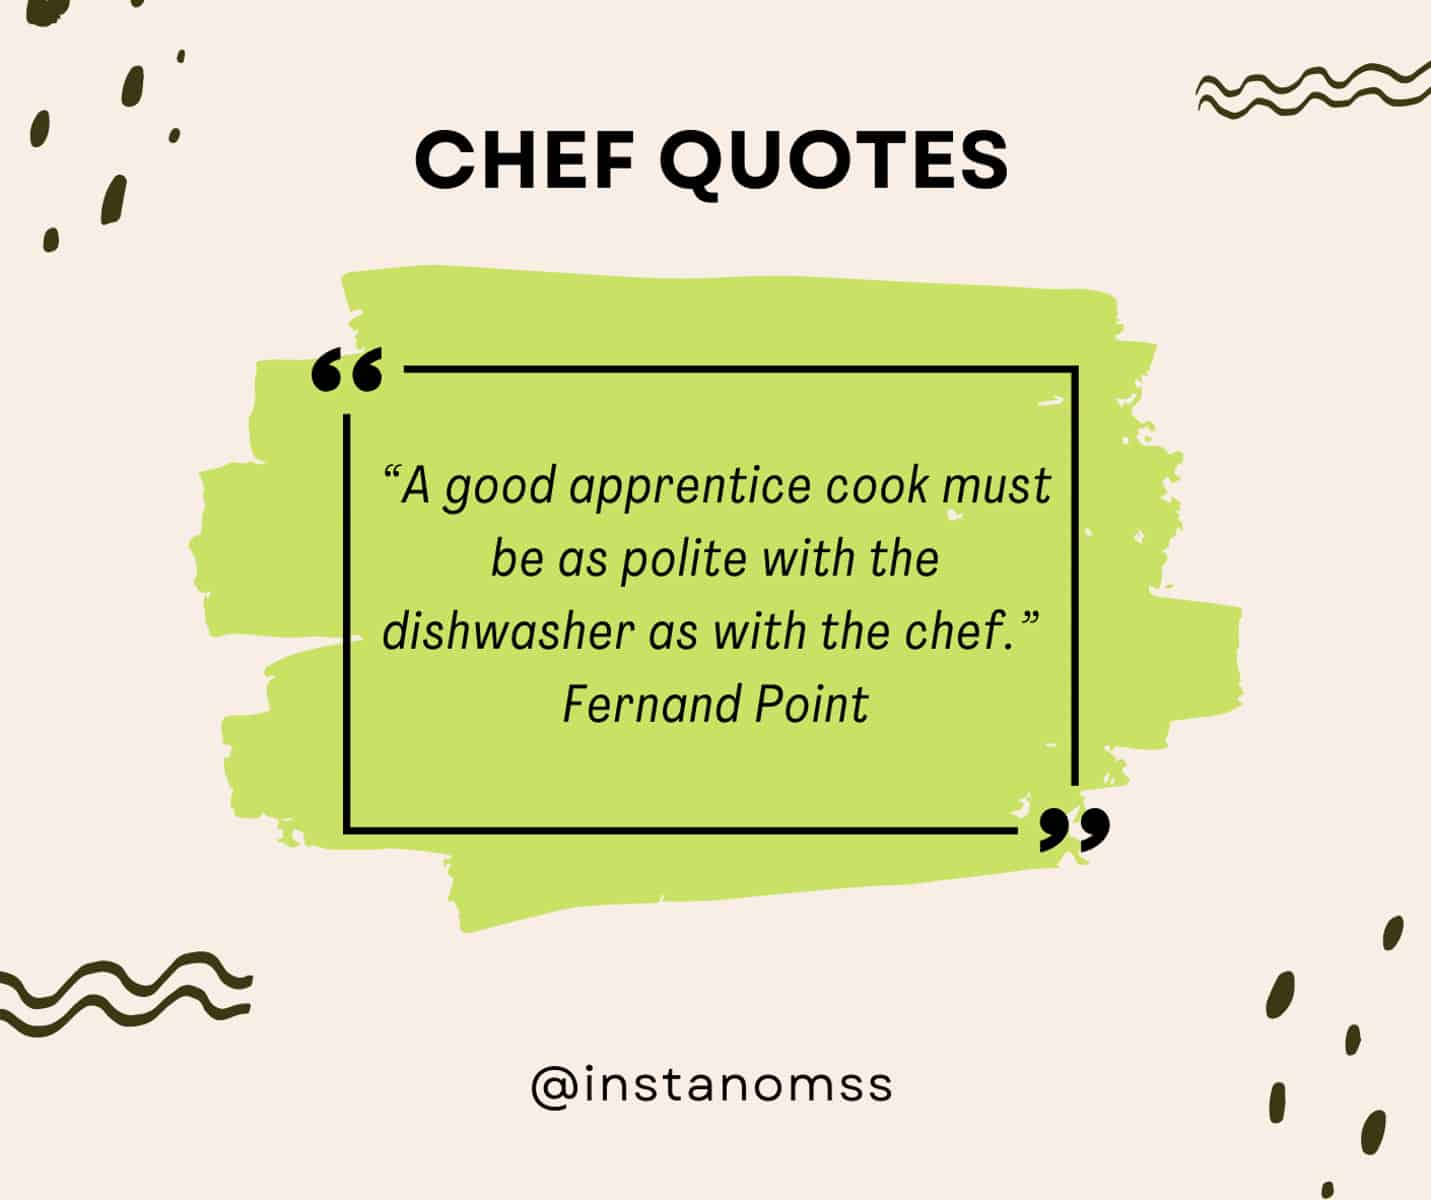 “A good apprentice cook must be as polite with the dishwasher as with the chef.” Fernand Point